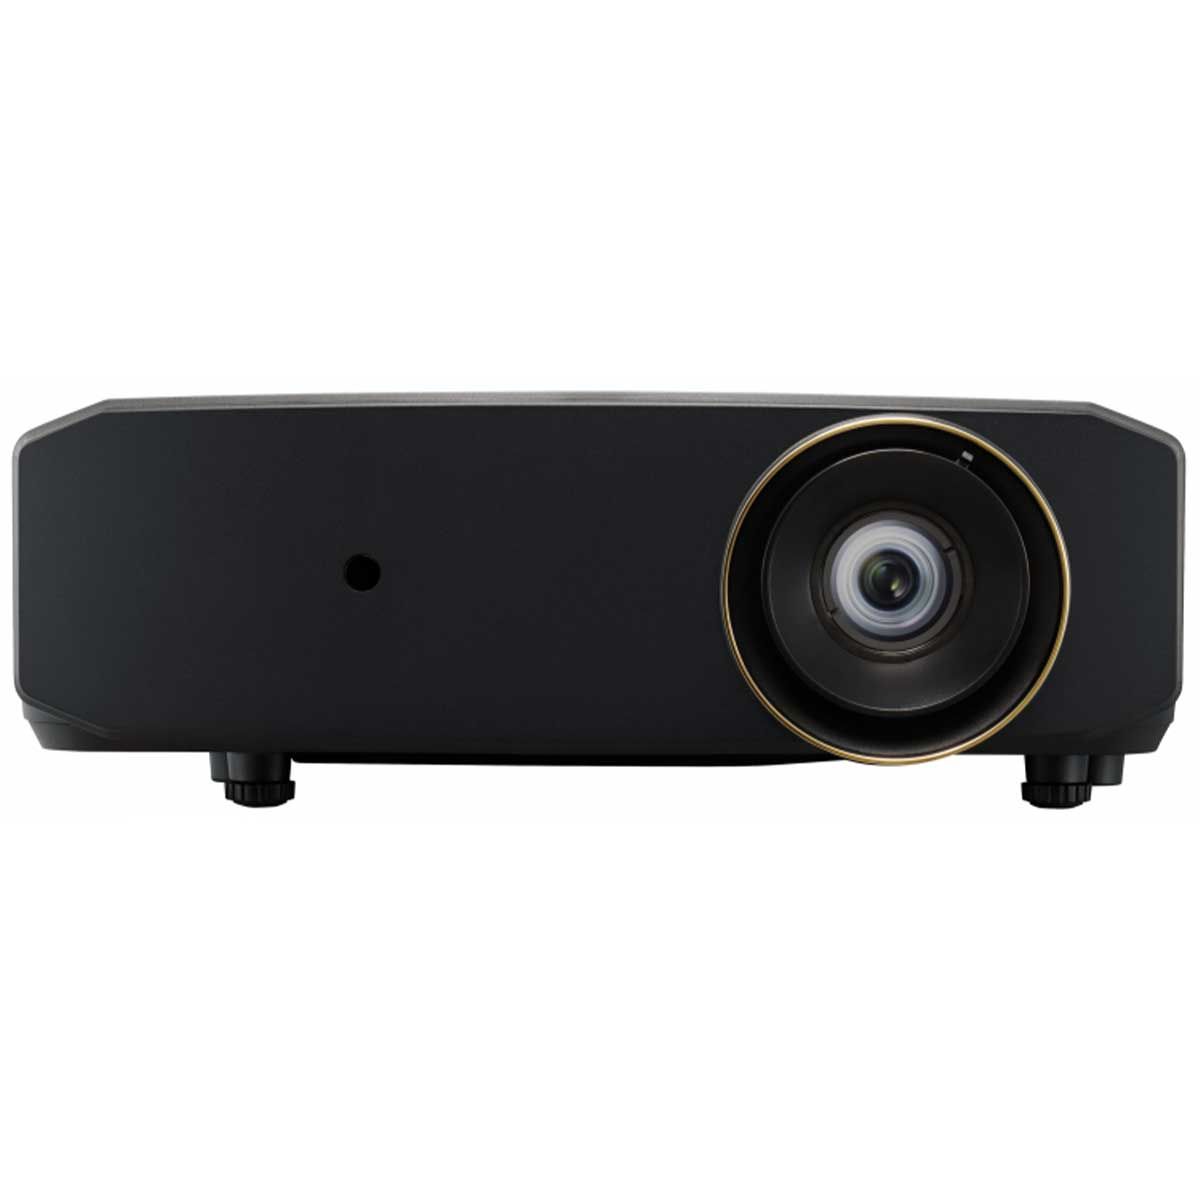 front view of JVC LX-NZ3 home theater projector in black color